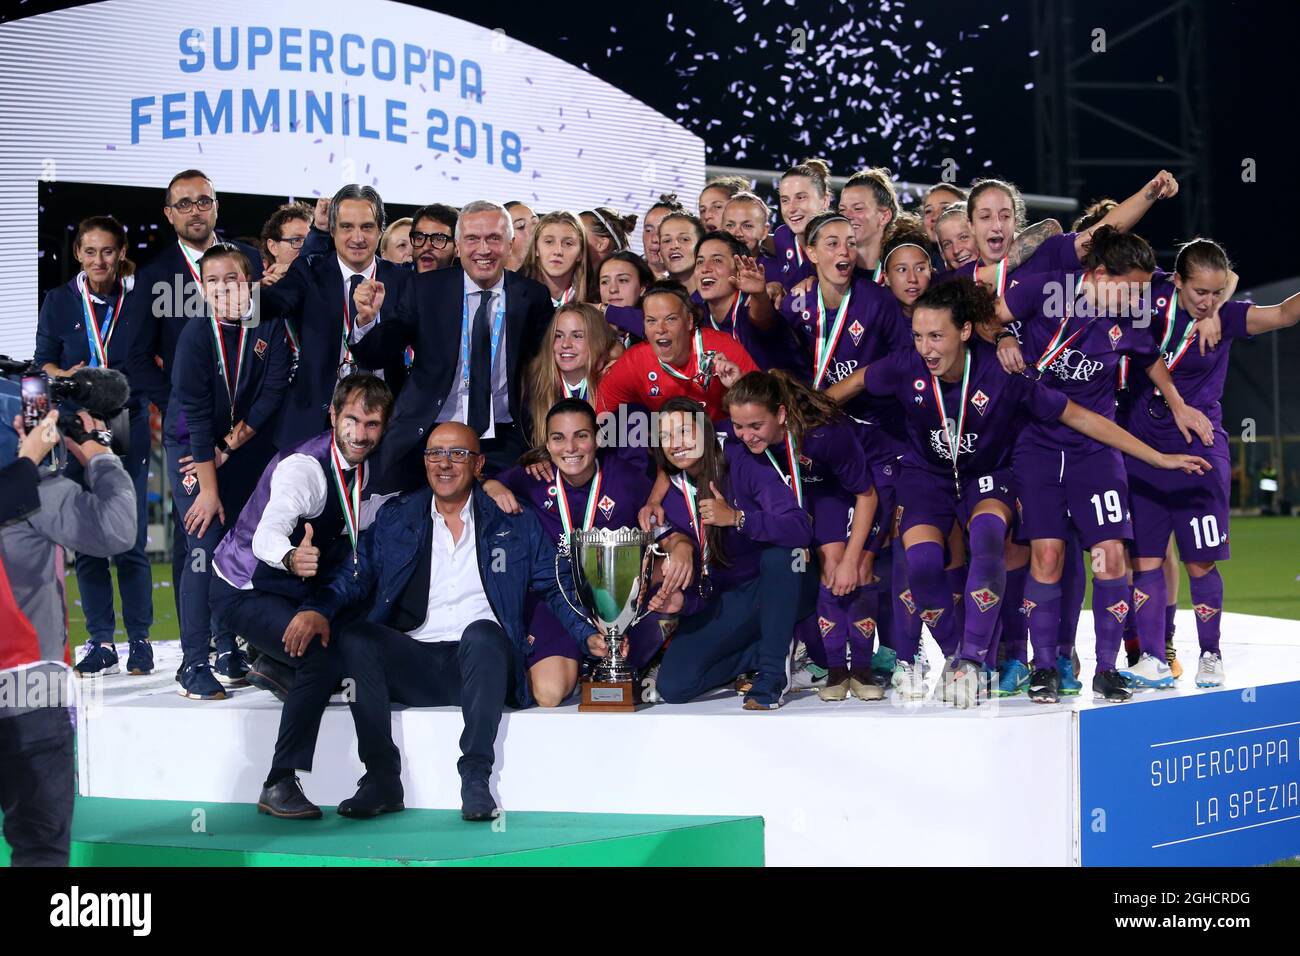 The Fiorentina team celebrates the victory during the Women's Italian Supercup final at the Alberto Piccolo's Stadium, La Spezia. Picture date: 13th October 2018. Picture credit should be: Jonathan Moscrop/Sportimage  via PA Images **ITALY OUT** Stock Photo